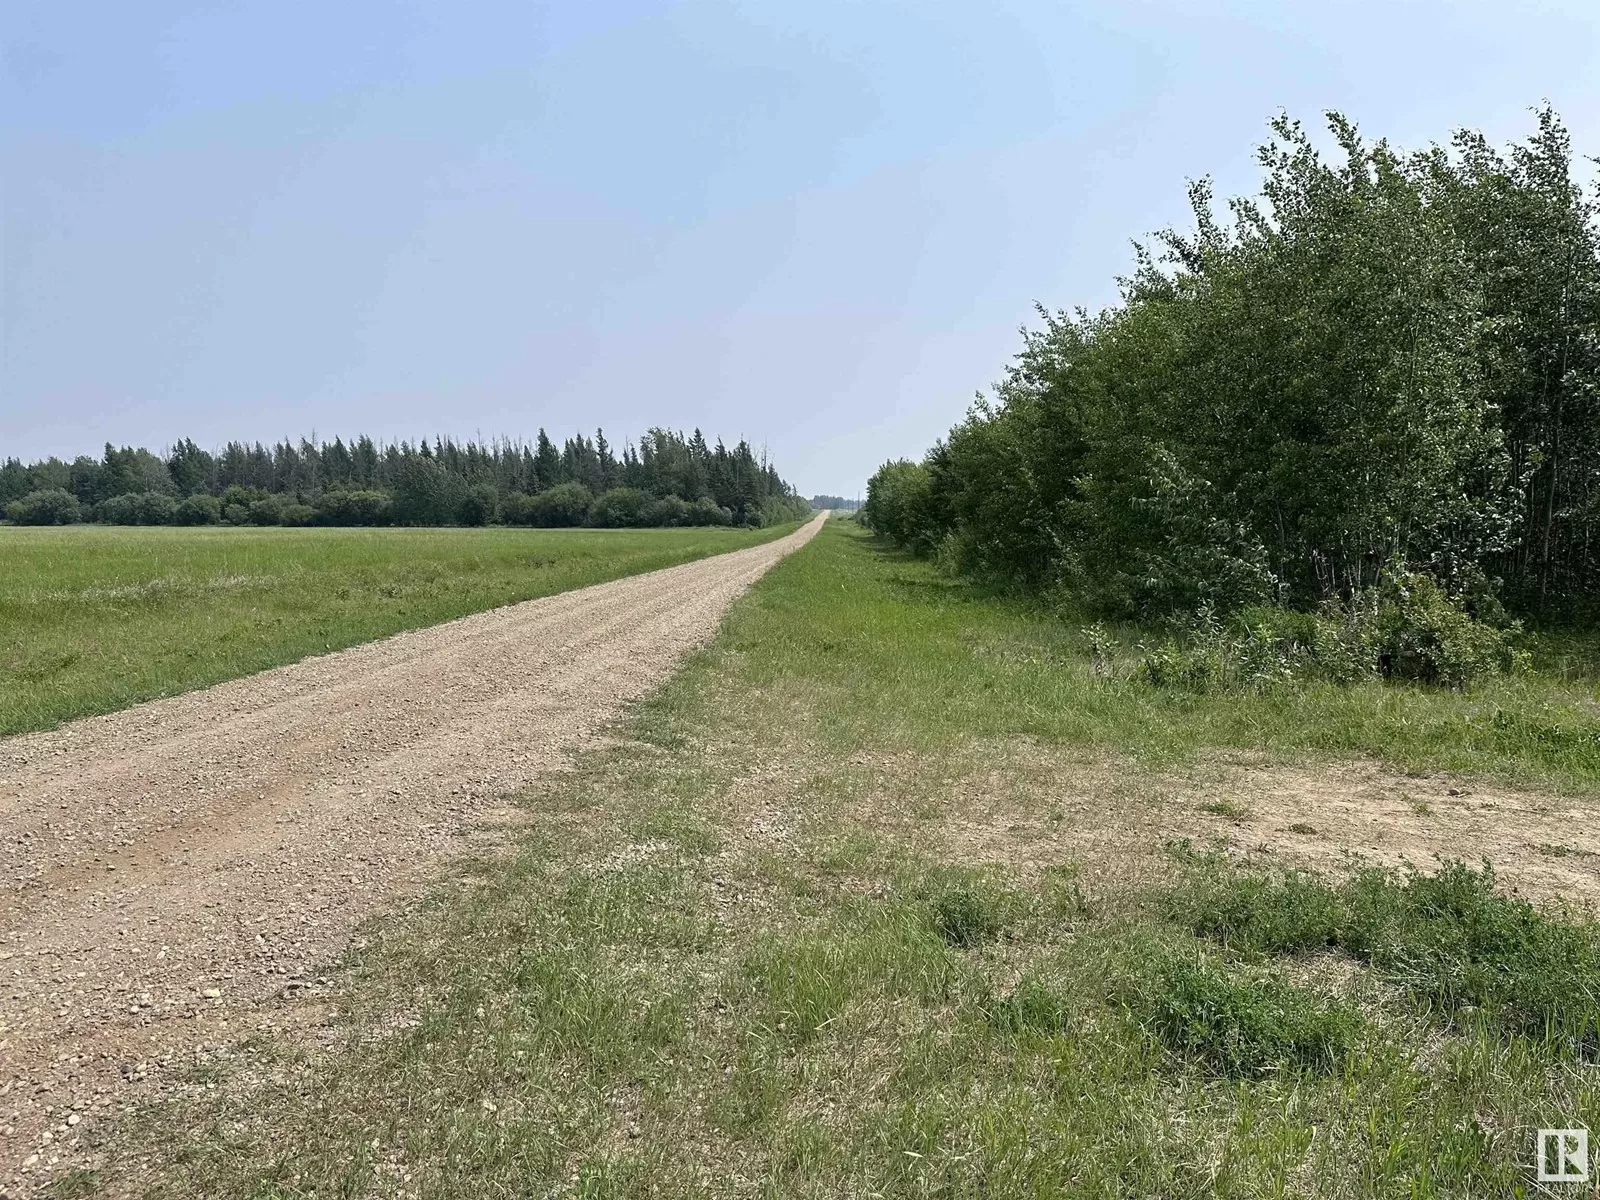 No Building for rent: 202xxx Twp Rd 670, Rural Athabasca County, Alberta T9S 1A2